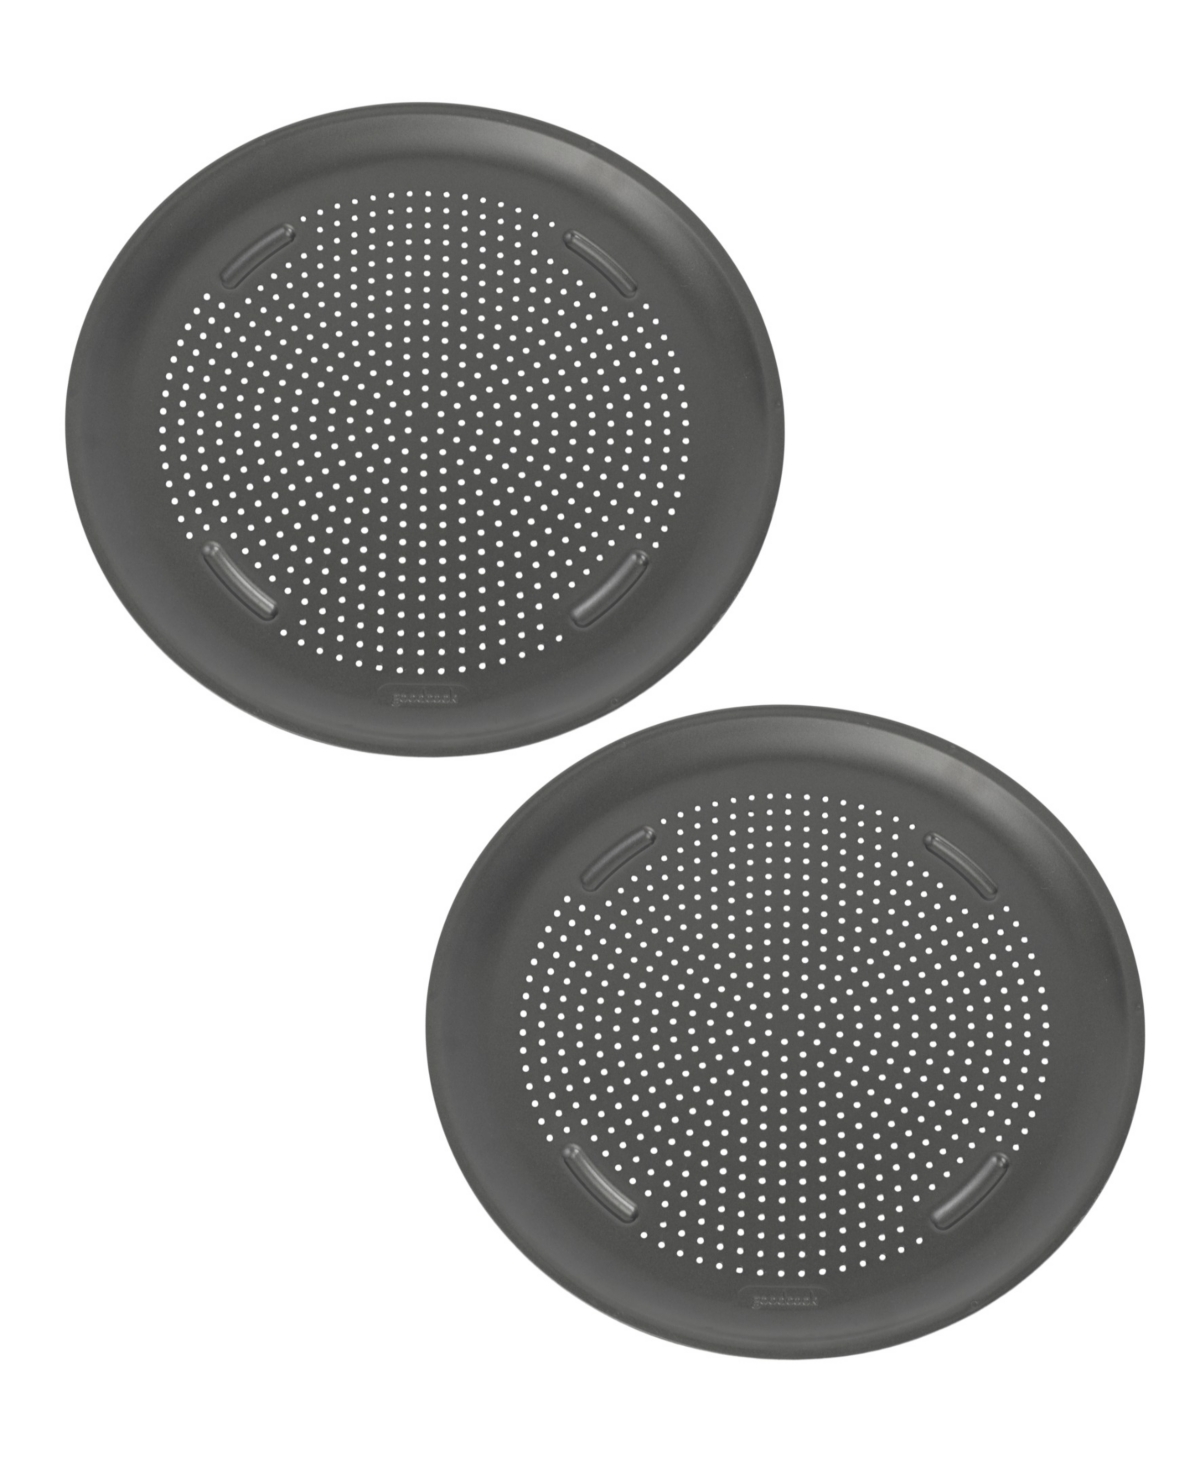 Good Cook Set Of 2 Air Perfect 15.75" Nonstick Carbon Steel Large Pizza Pans In Gray